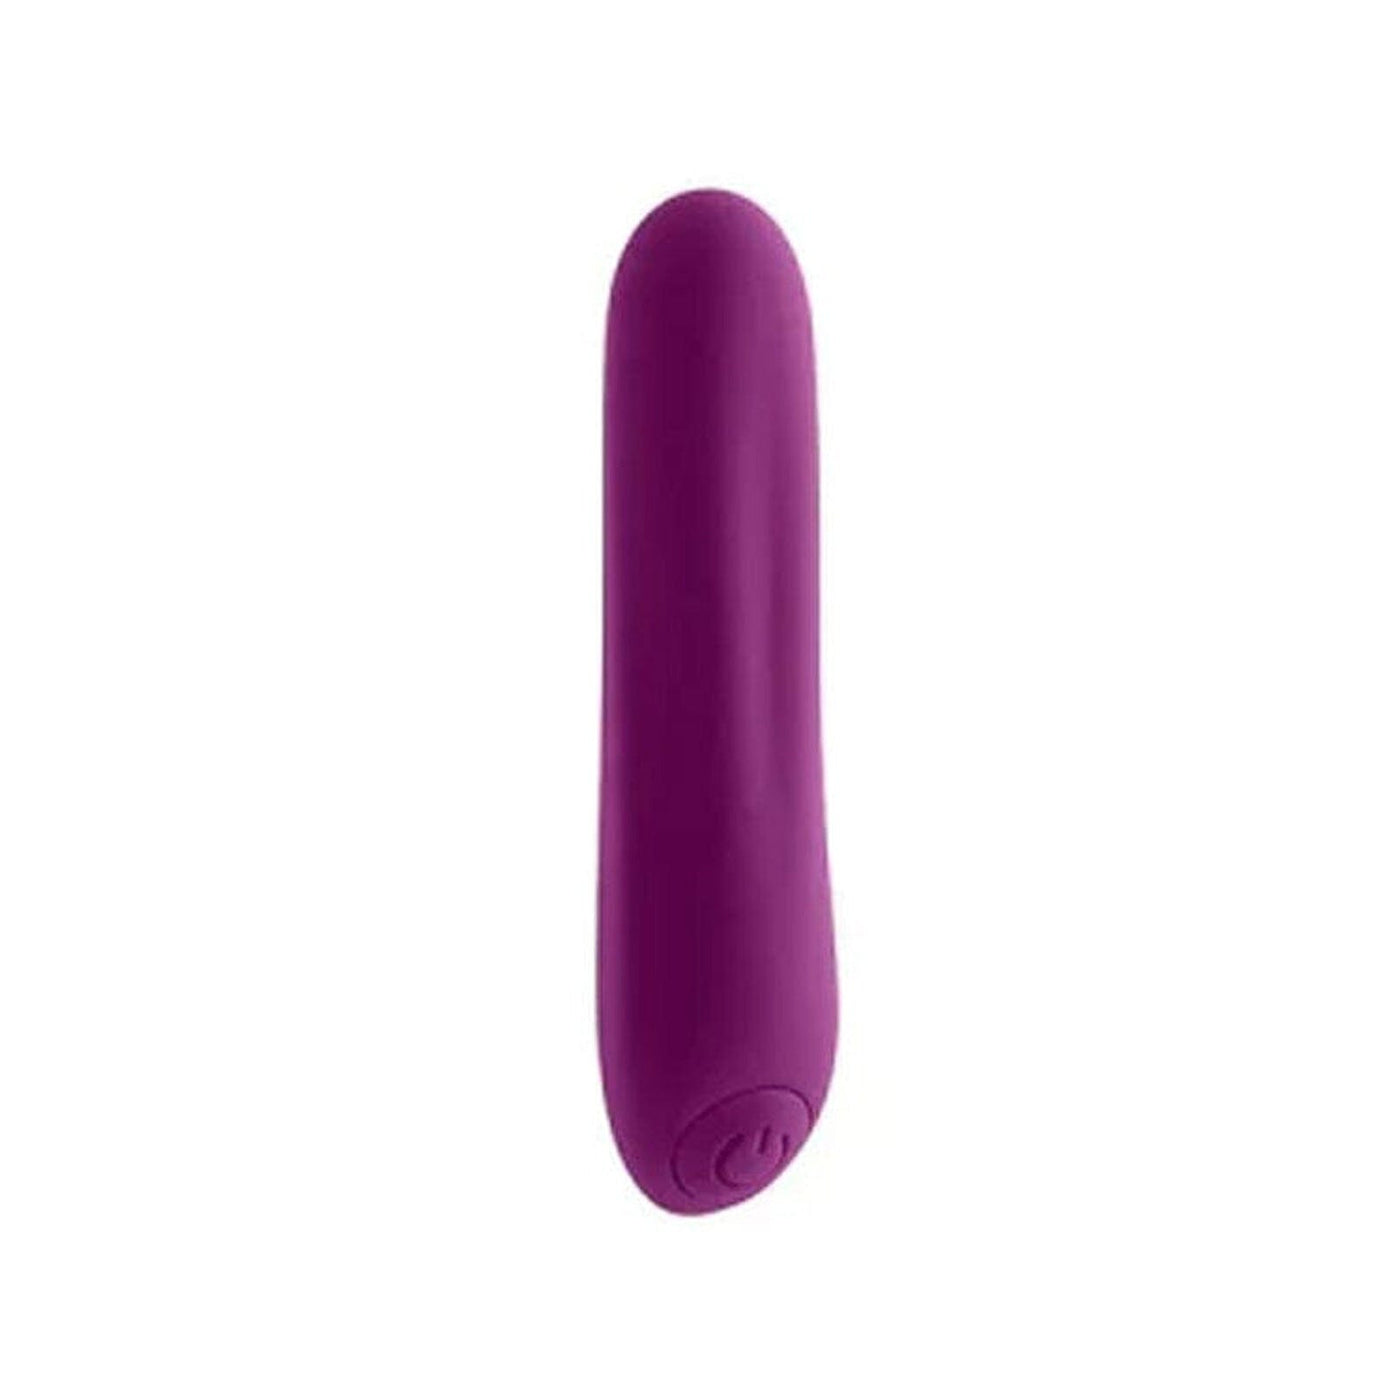 Playboy Bullet Classic Silicone Vibrator